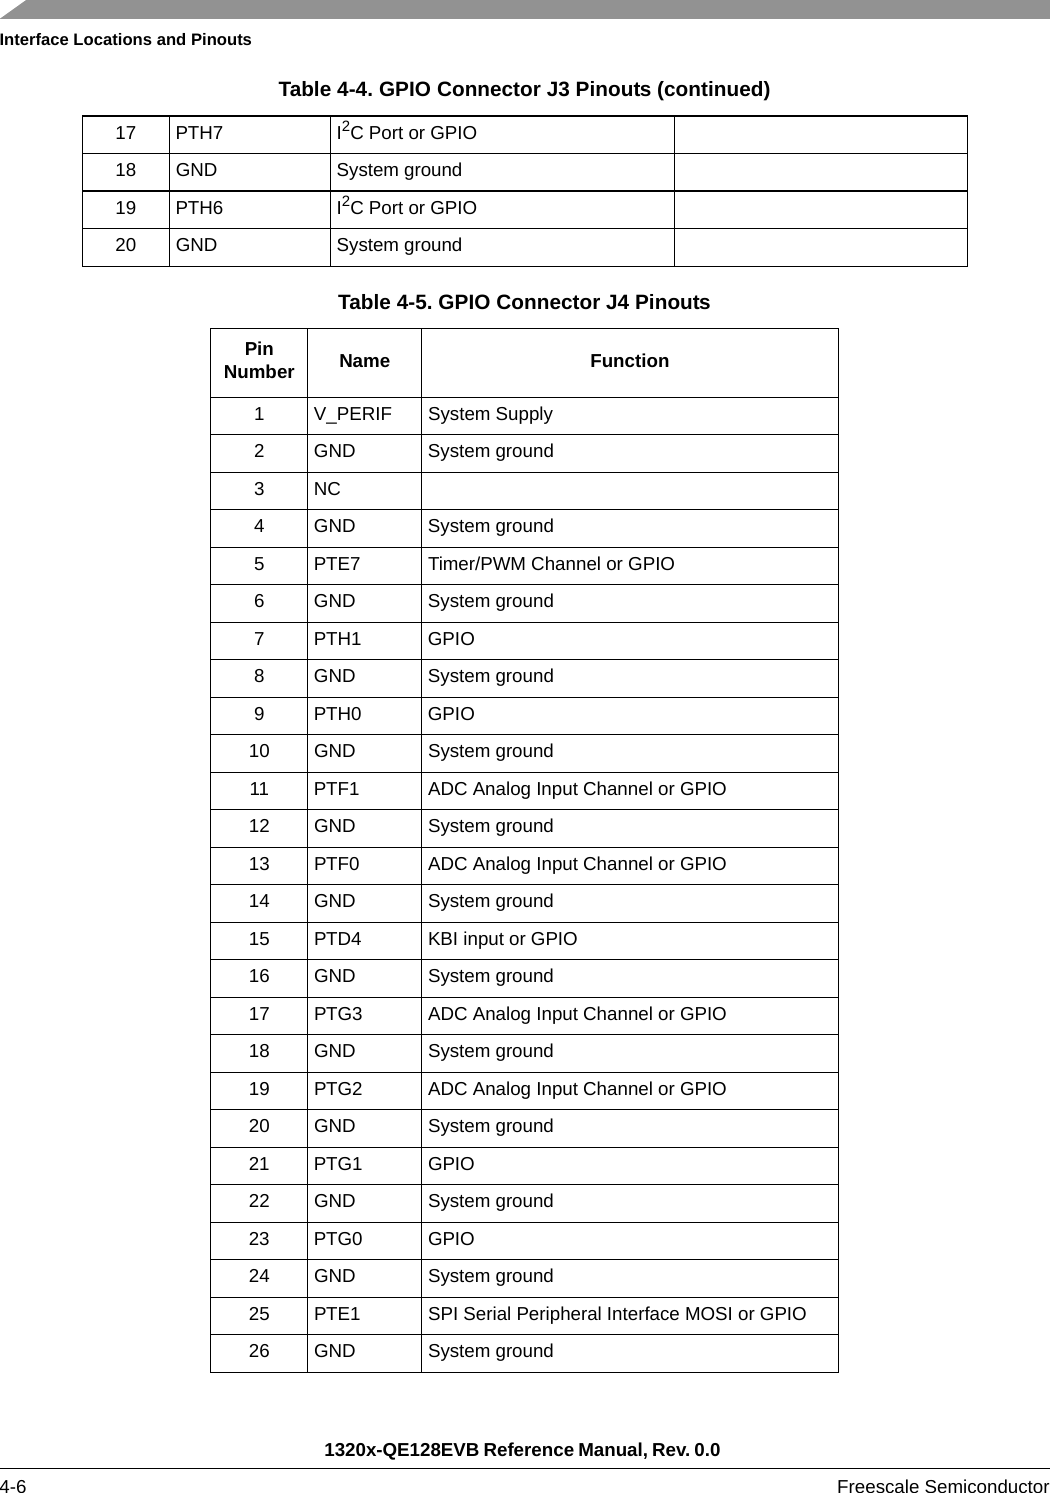 Interface Locations and Pinouts1320x-QE128EVB Reference Manual, Rev. 0.0 4-6 Freescale Semiconductor17 PTH7 I2C Port or GPIO18 GND System ground19 PTH6 I2C Port or GPIO20 GND System groundTable 4-5. GPIO Connector J4 PinoutsPinNumber Name Function1 V_PERIF System Supply2 GND System ground3NC4 GND System ground5 PTE7 Timer/PWM Channel or GPIO6 GND System ground7PTH1 GPIO8 GND System ground9PTH0 GPIO10 GND System ground11 PTF1 ADC Analog Input Channel or GPIO12 GND System ground13 PTF0 ADC Analog Input Channel or GPIO14 GND System ground15 PTD4 KBI input or GPIO16 GND System ground17 PTG3 ADC Analog Input Channel or GPIO18 GND System ground19 PTG2 ADC Analog Input Channel or GPIO20 GND System ground21 PTG1 GPIO22 GND System ground23 PTG0 GPIO24 GND System ground25 PTE1 SPI Serial Peripheral Interface MOSI or GPIO26 GND System groundTable 4-4. GPIO Connector J3 Pinouts (continued)